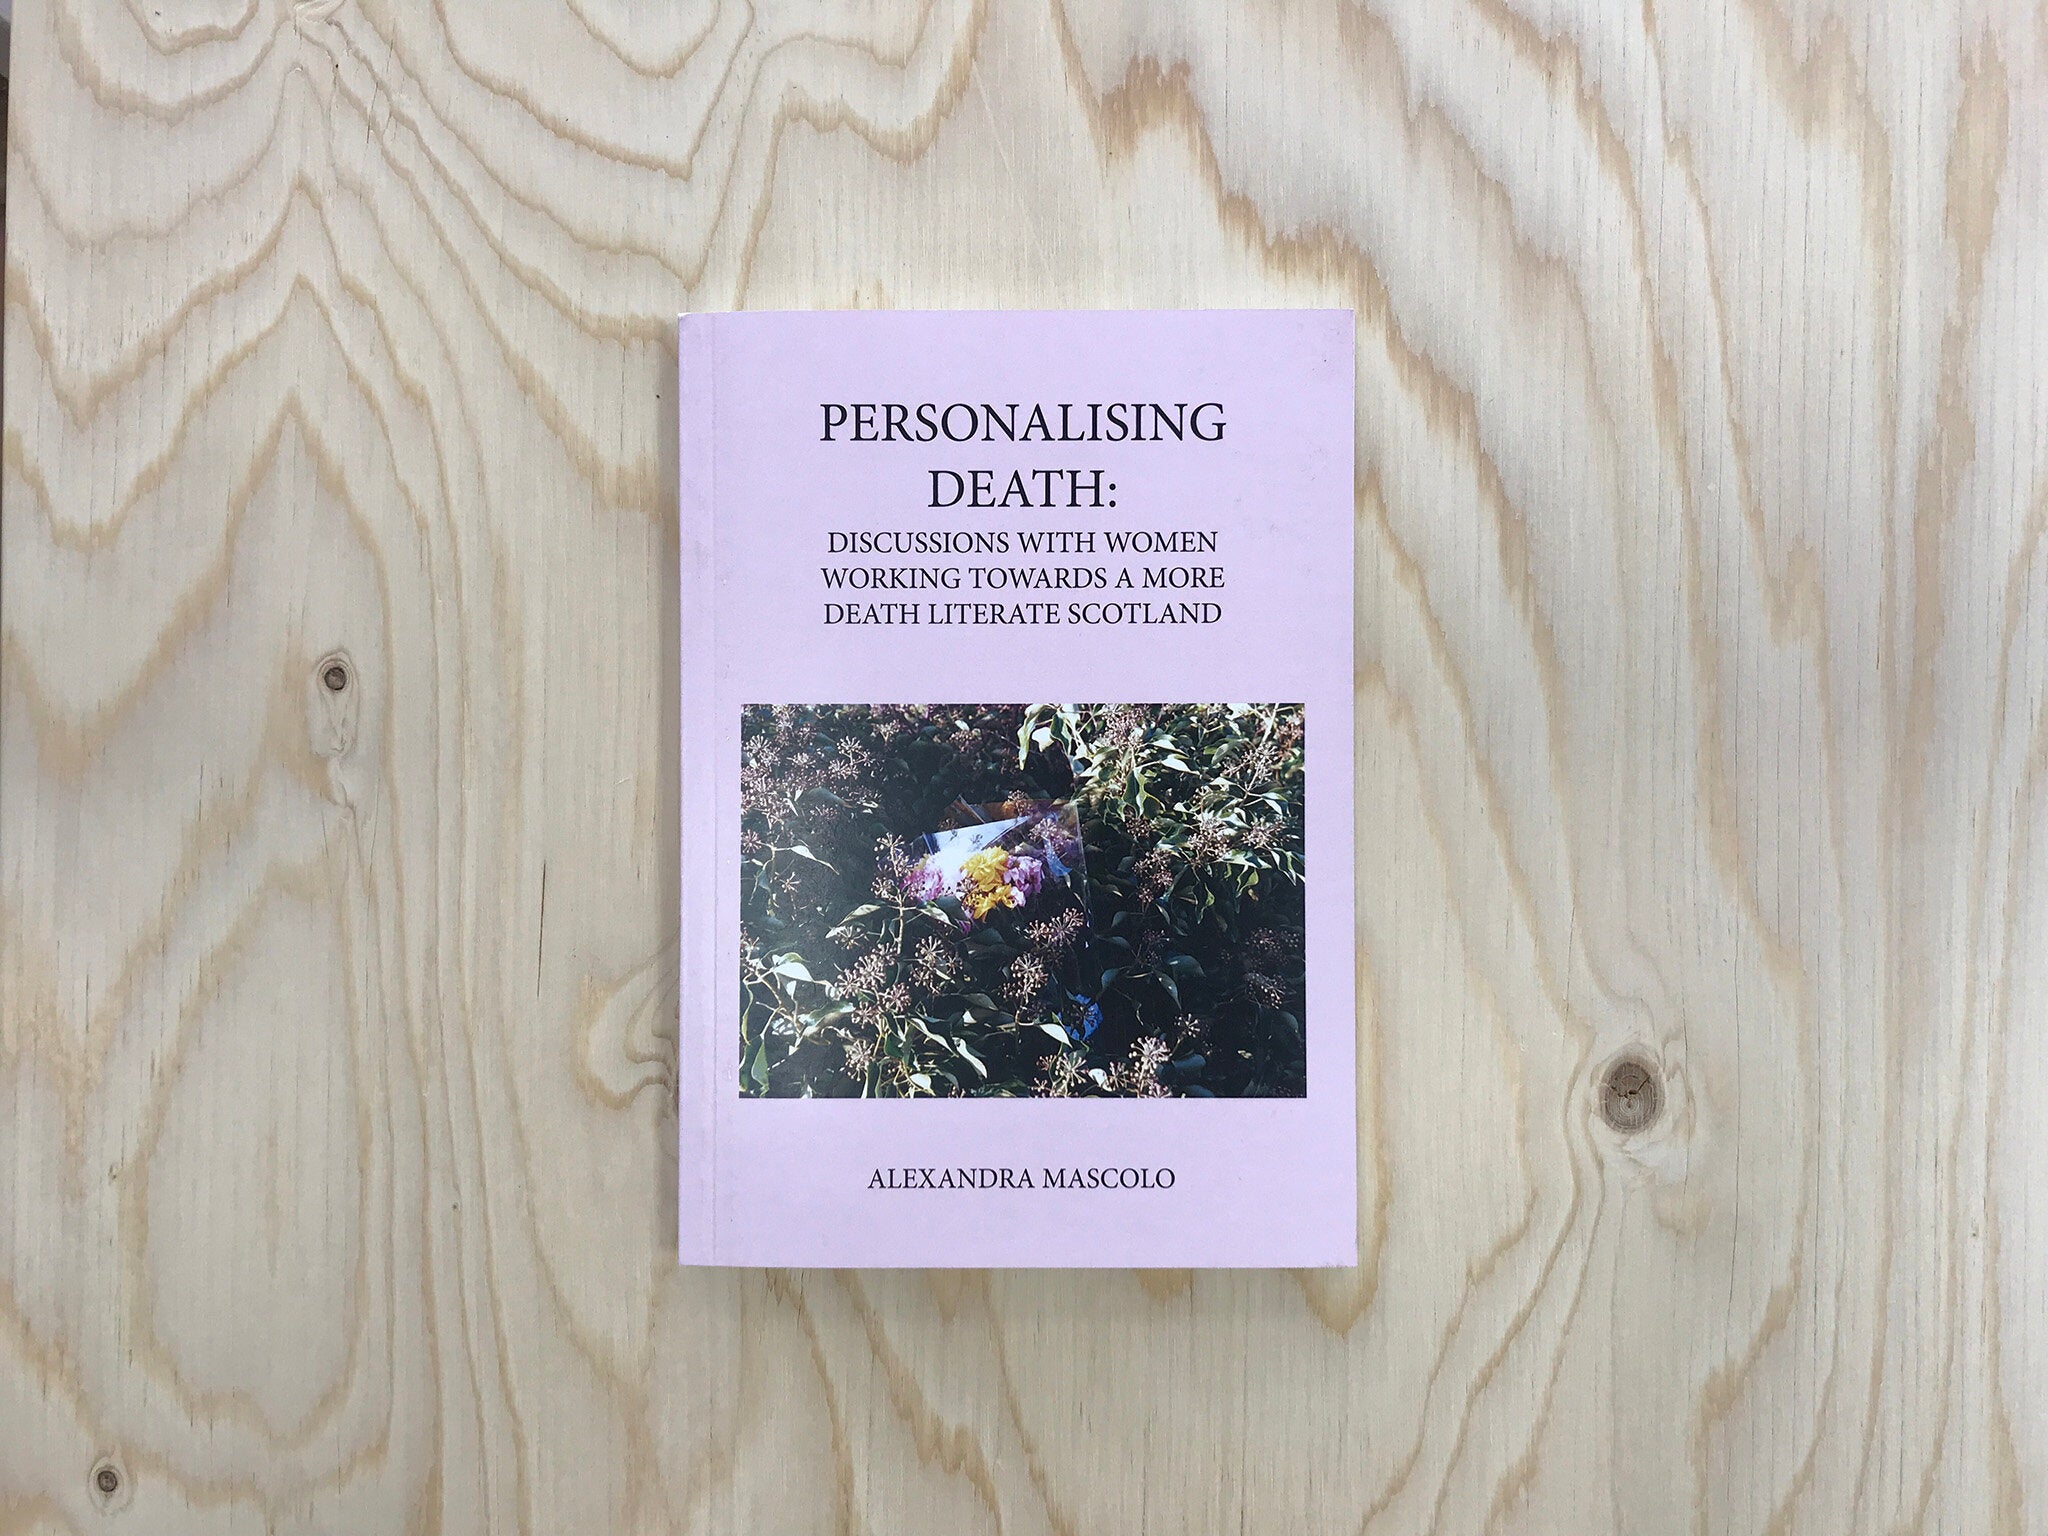 PERSONALISING DEATH: DISCUSSIONS WITH WOMEN WORKING... by Alexandra Mascolo